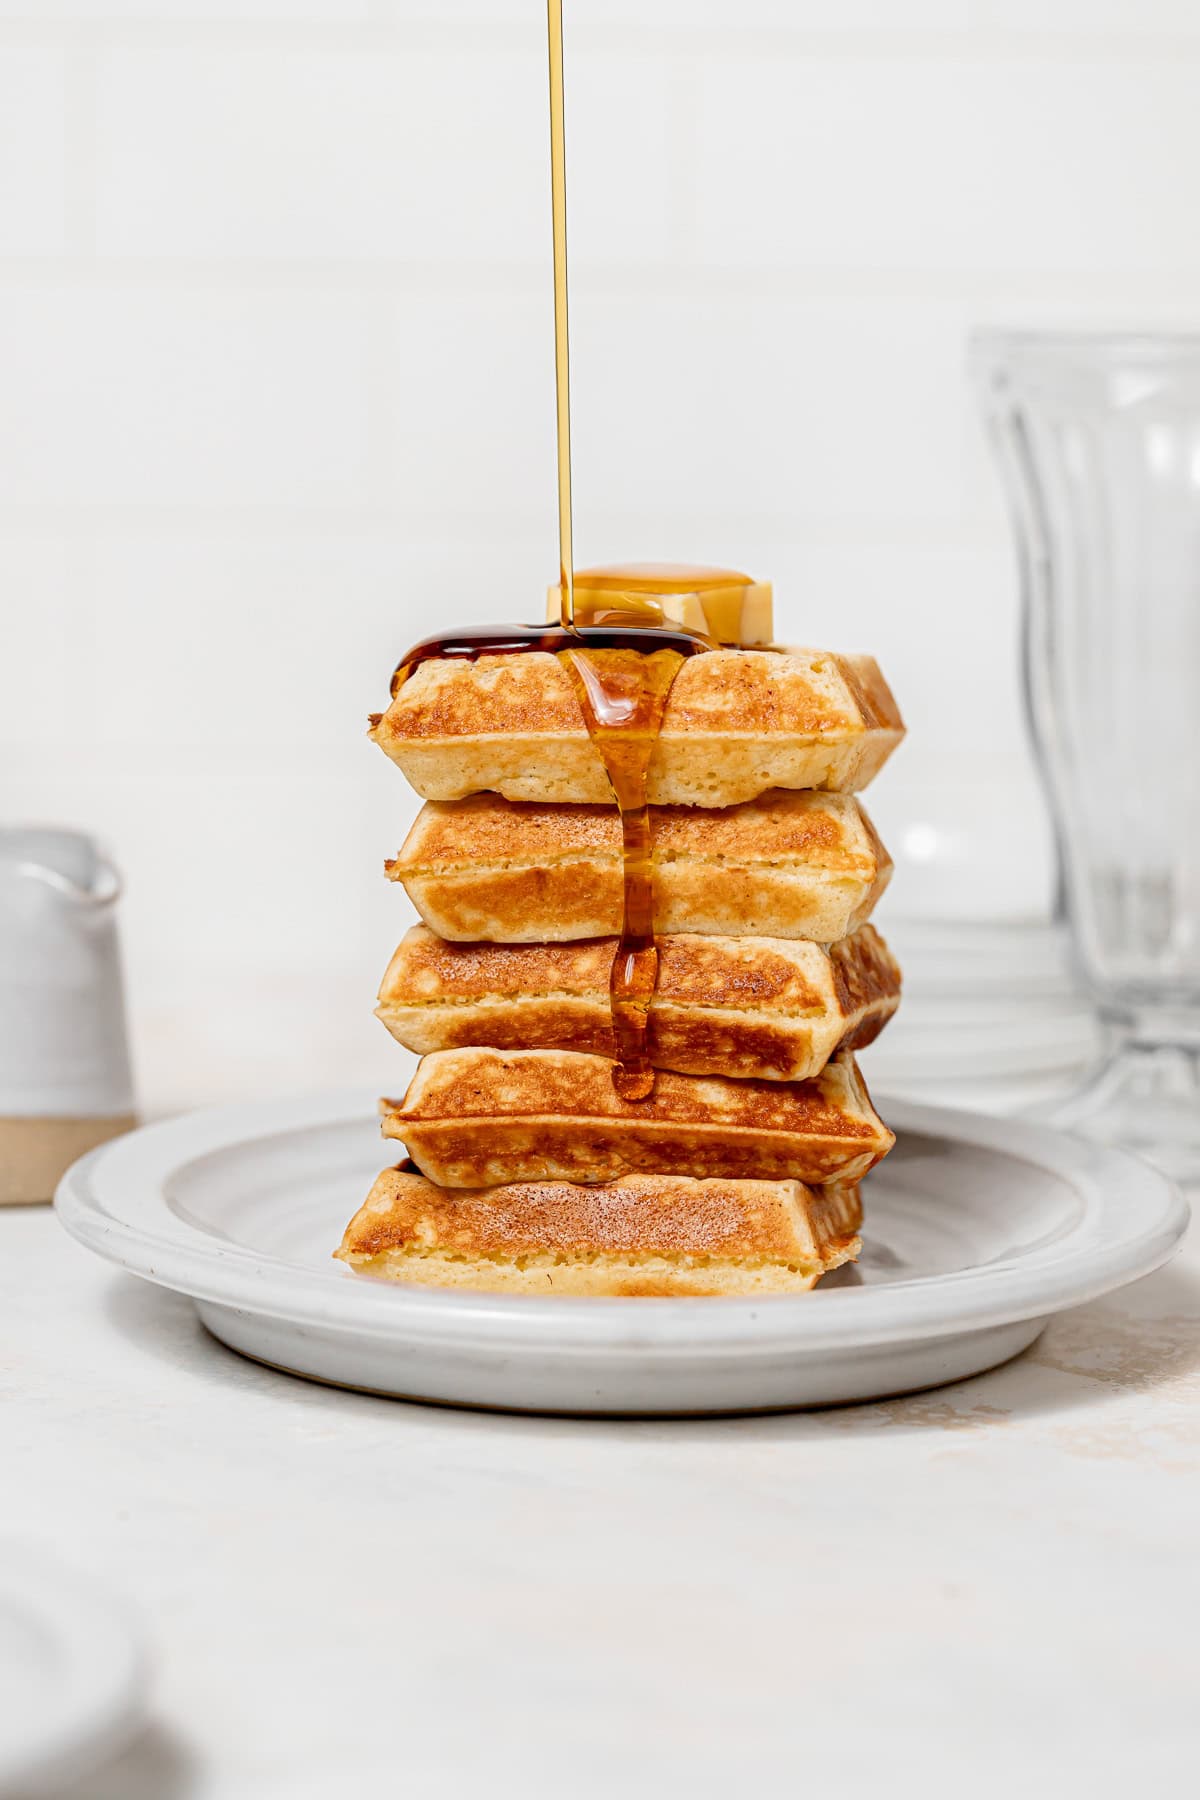 yeasted belgian waffles stacked with maple syrup being poured on top.